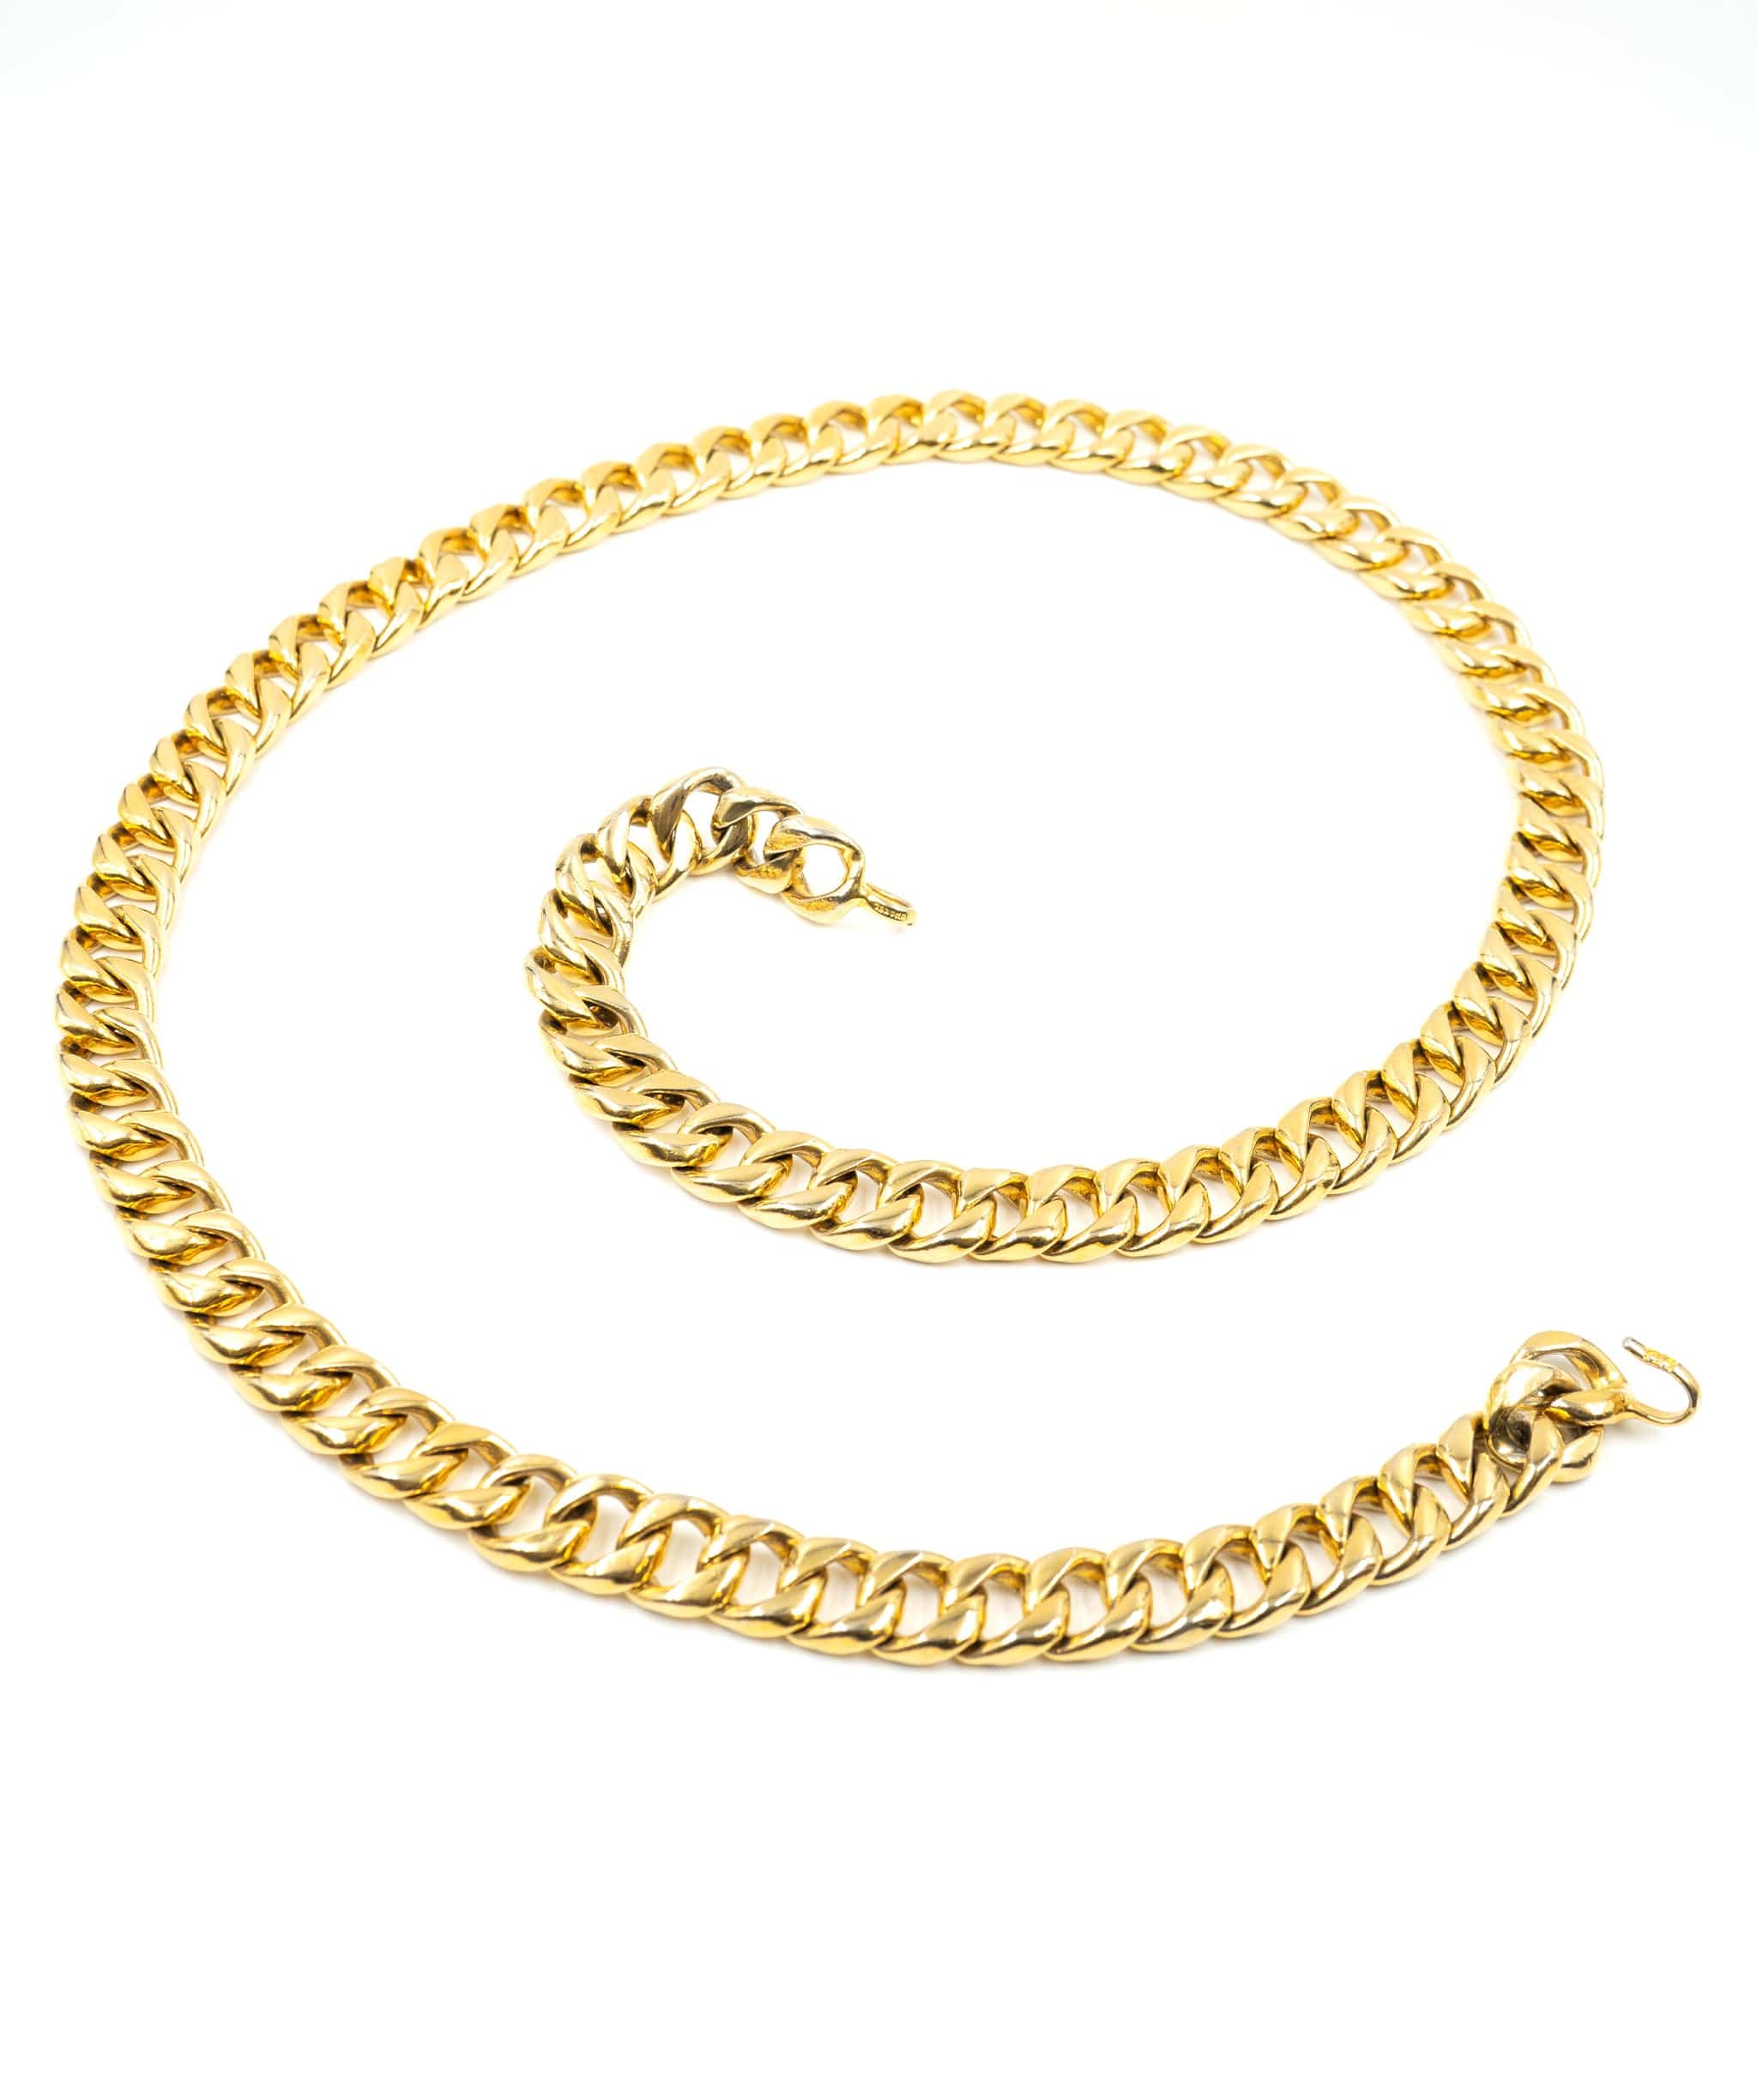 Chanel Chanel Gold Chain Belt Necklace - AGL1671